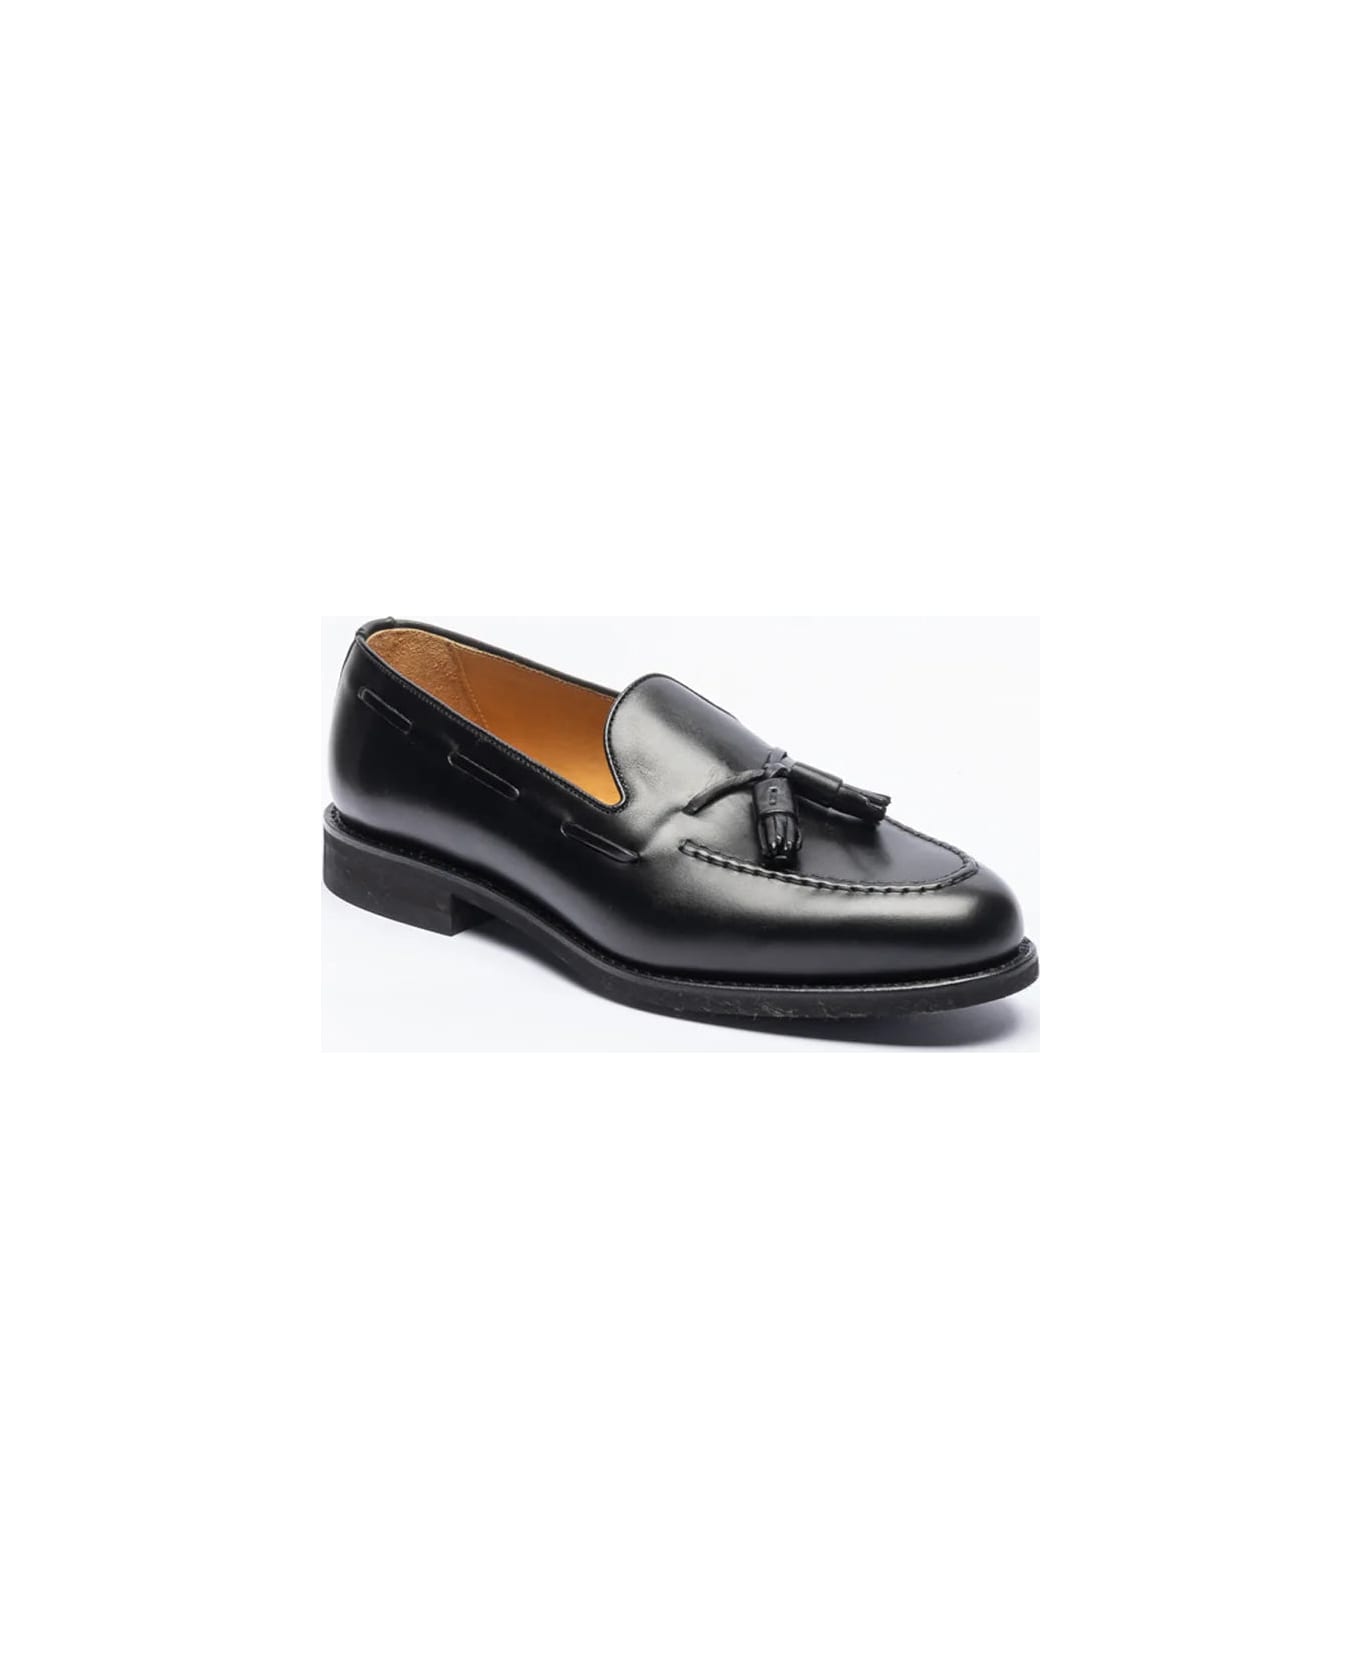 Berwick 1707 Tassel Loafer In Black Leather With Rubber Sole - Nero